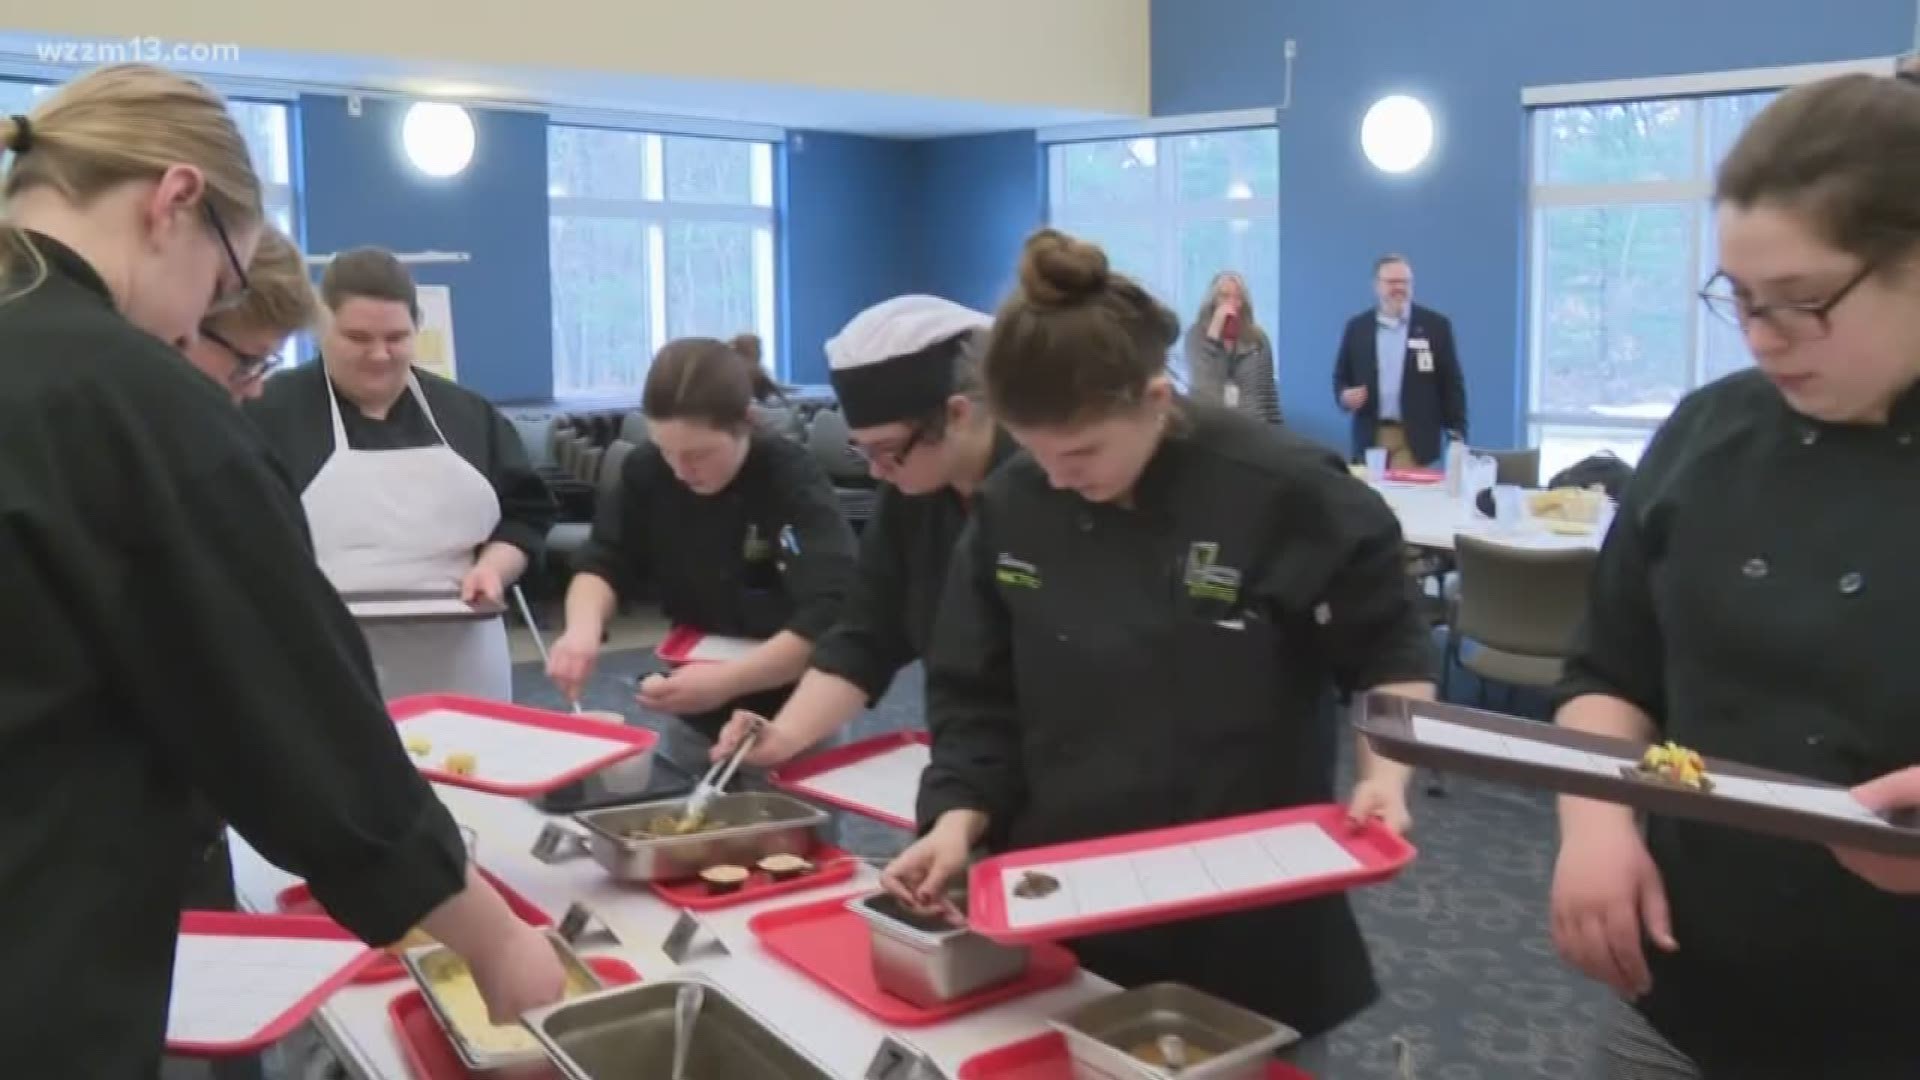 Students working mushrooms into school lunches